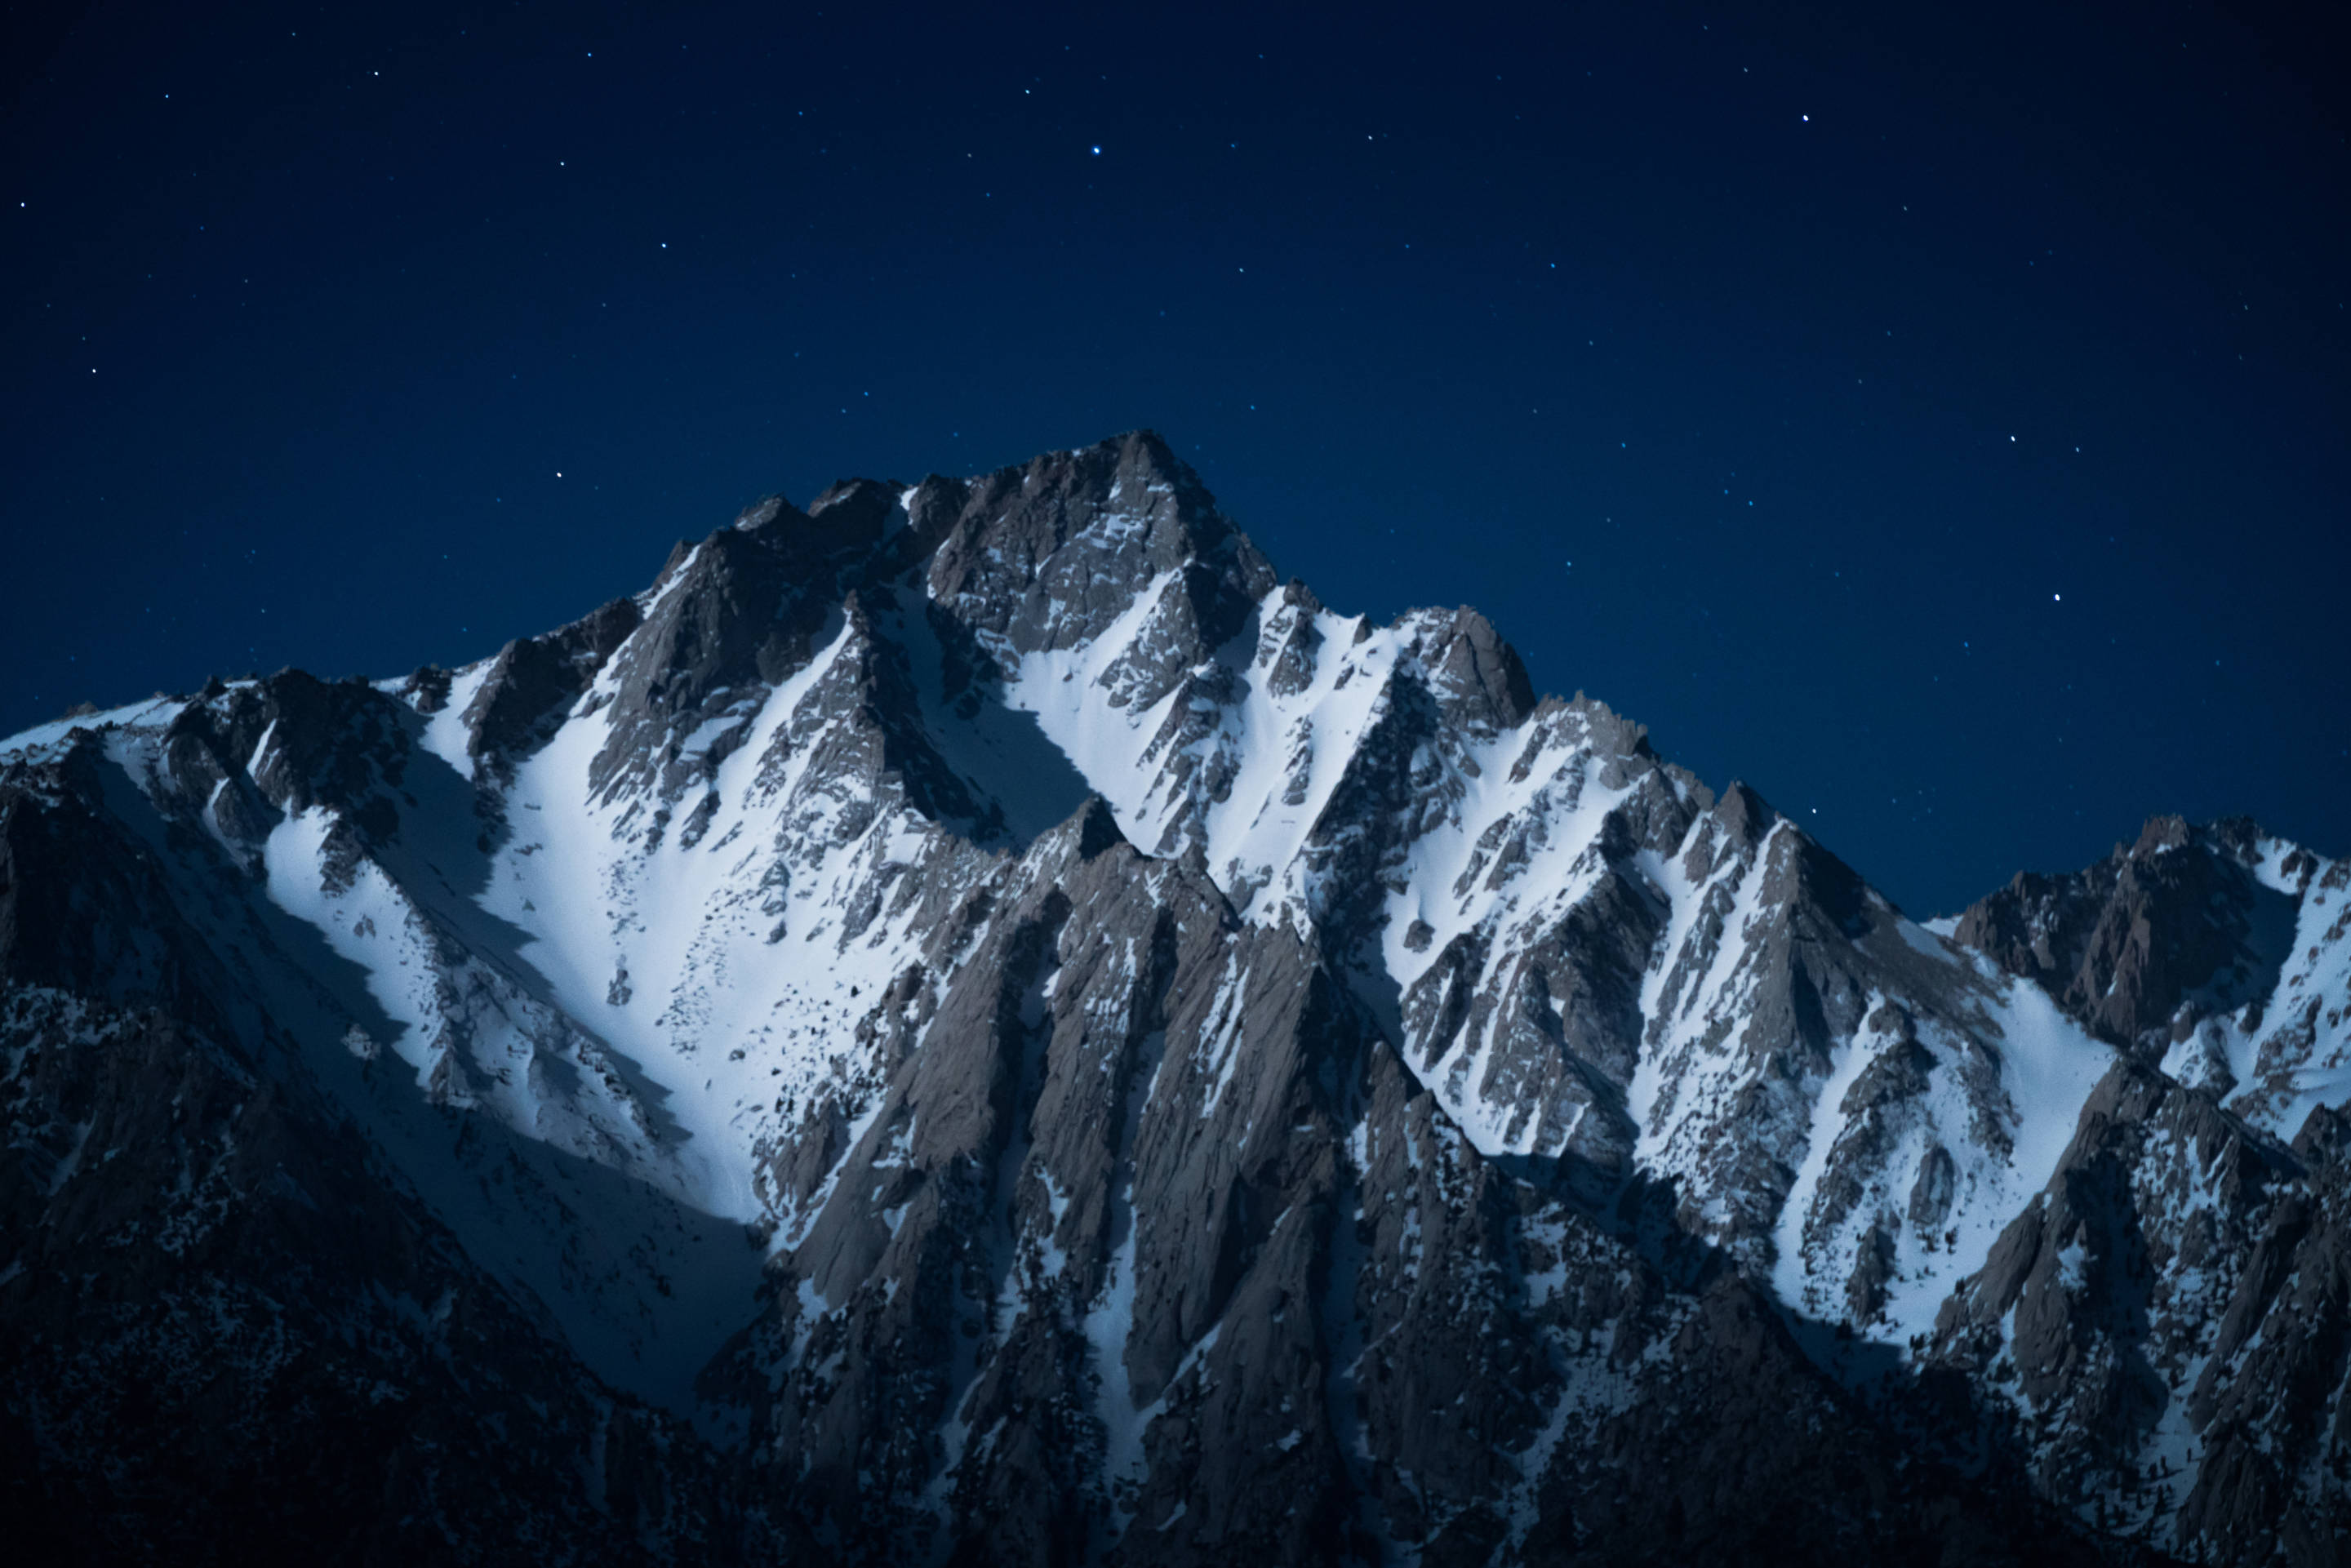 Night photography of the stars over Lone Pine Peak in the Eastern Sierra from Lone Pine, California